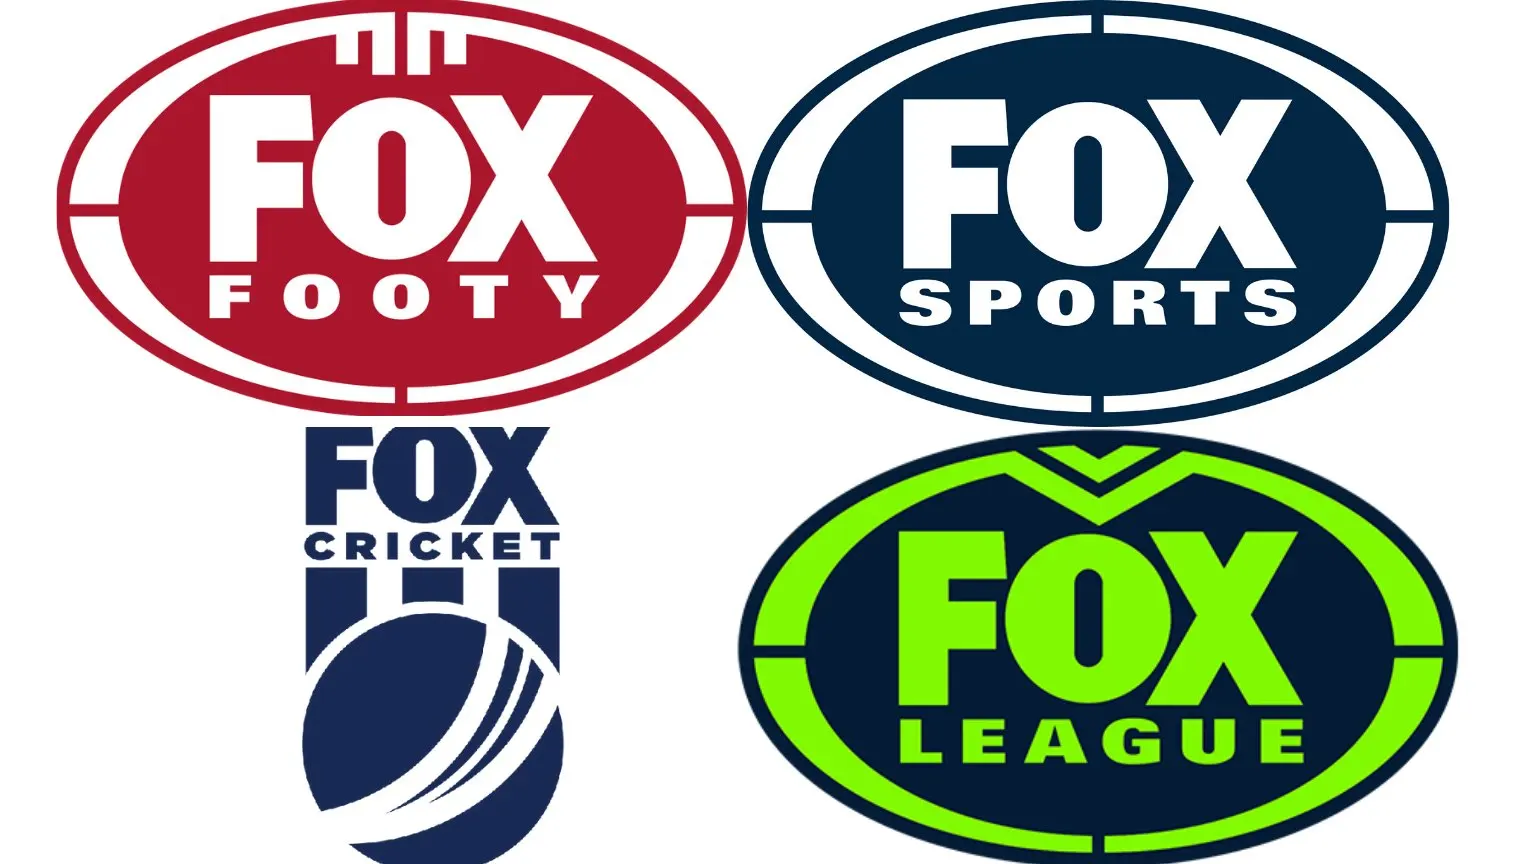 Fox Sports without Foxtel